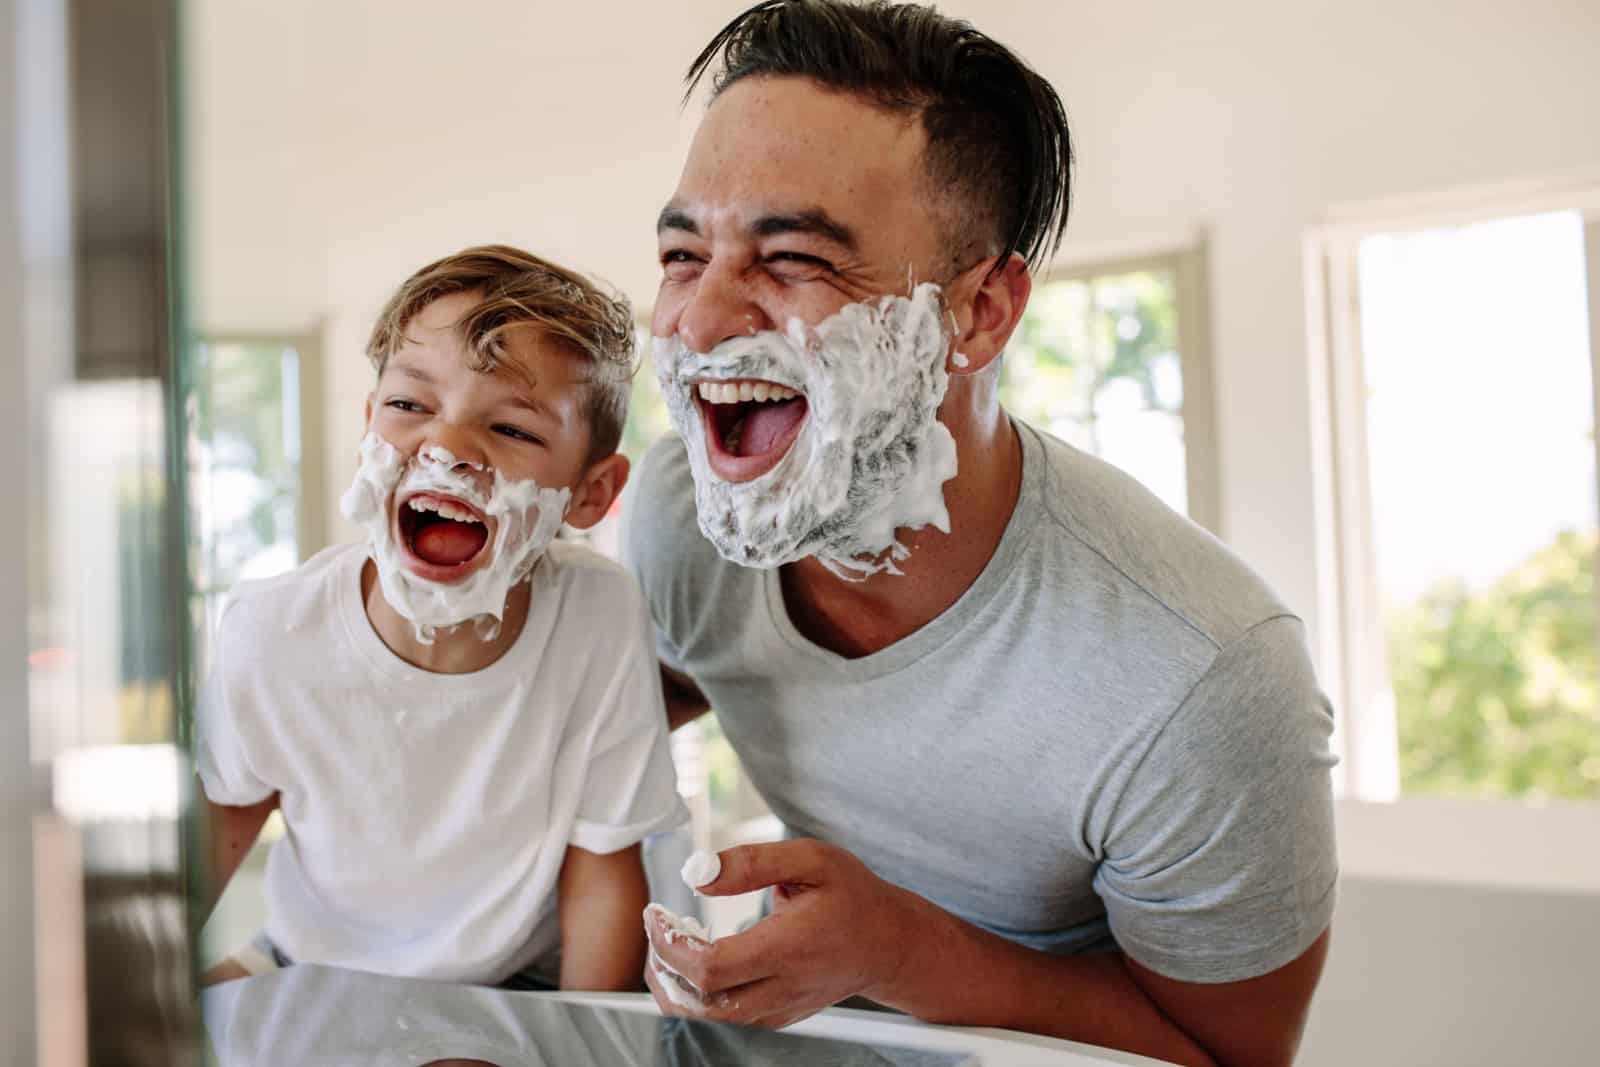 Man and little boy with shaving foam on their faces looking into the bathroom mirror and laughing